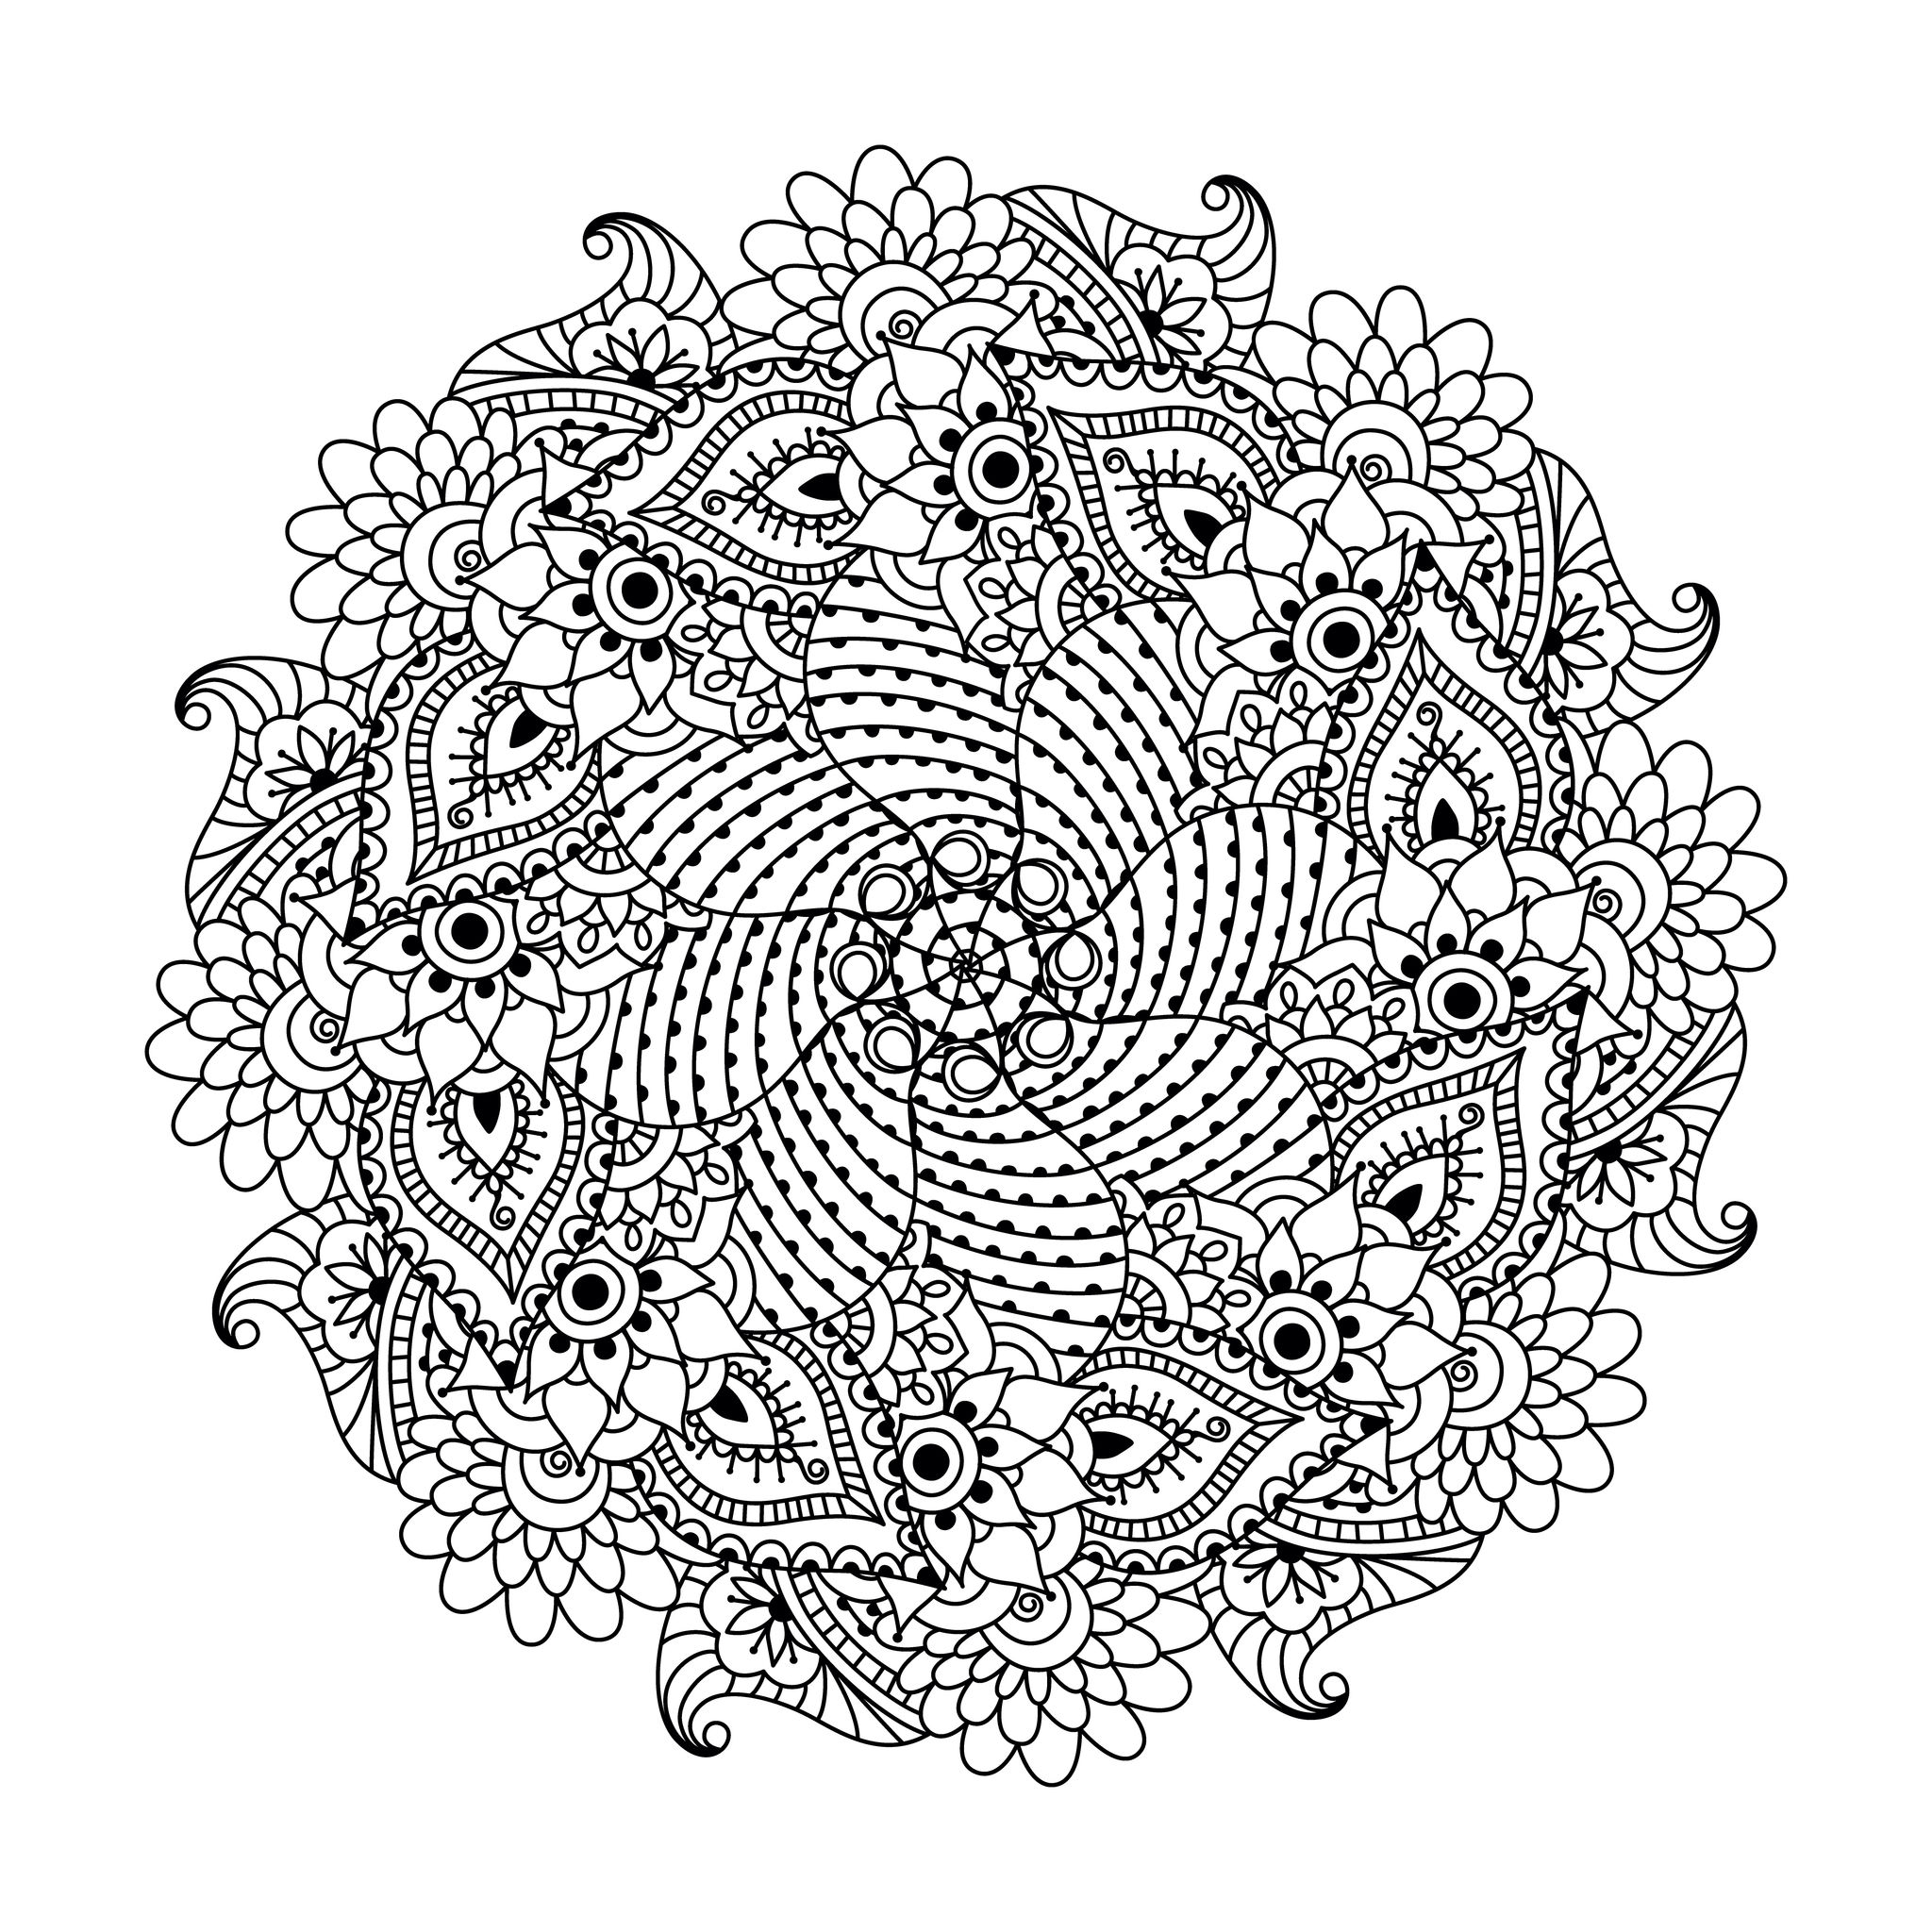 In this Mandala, the vegetal world is perfectly integrated, and is very realistic. Print it for free and color it ! Be precise and pernickety, this Mandala is quite complex.